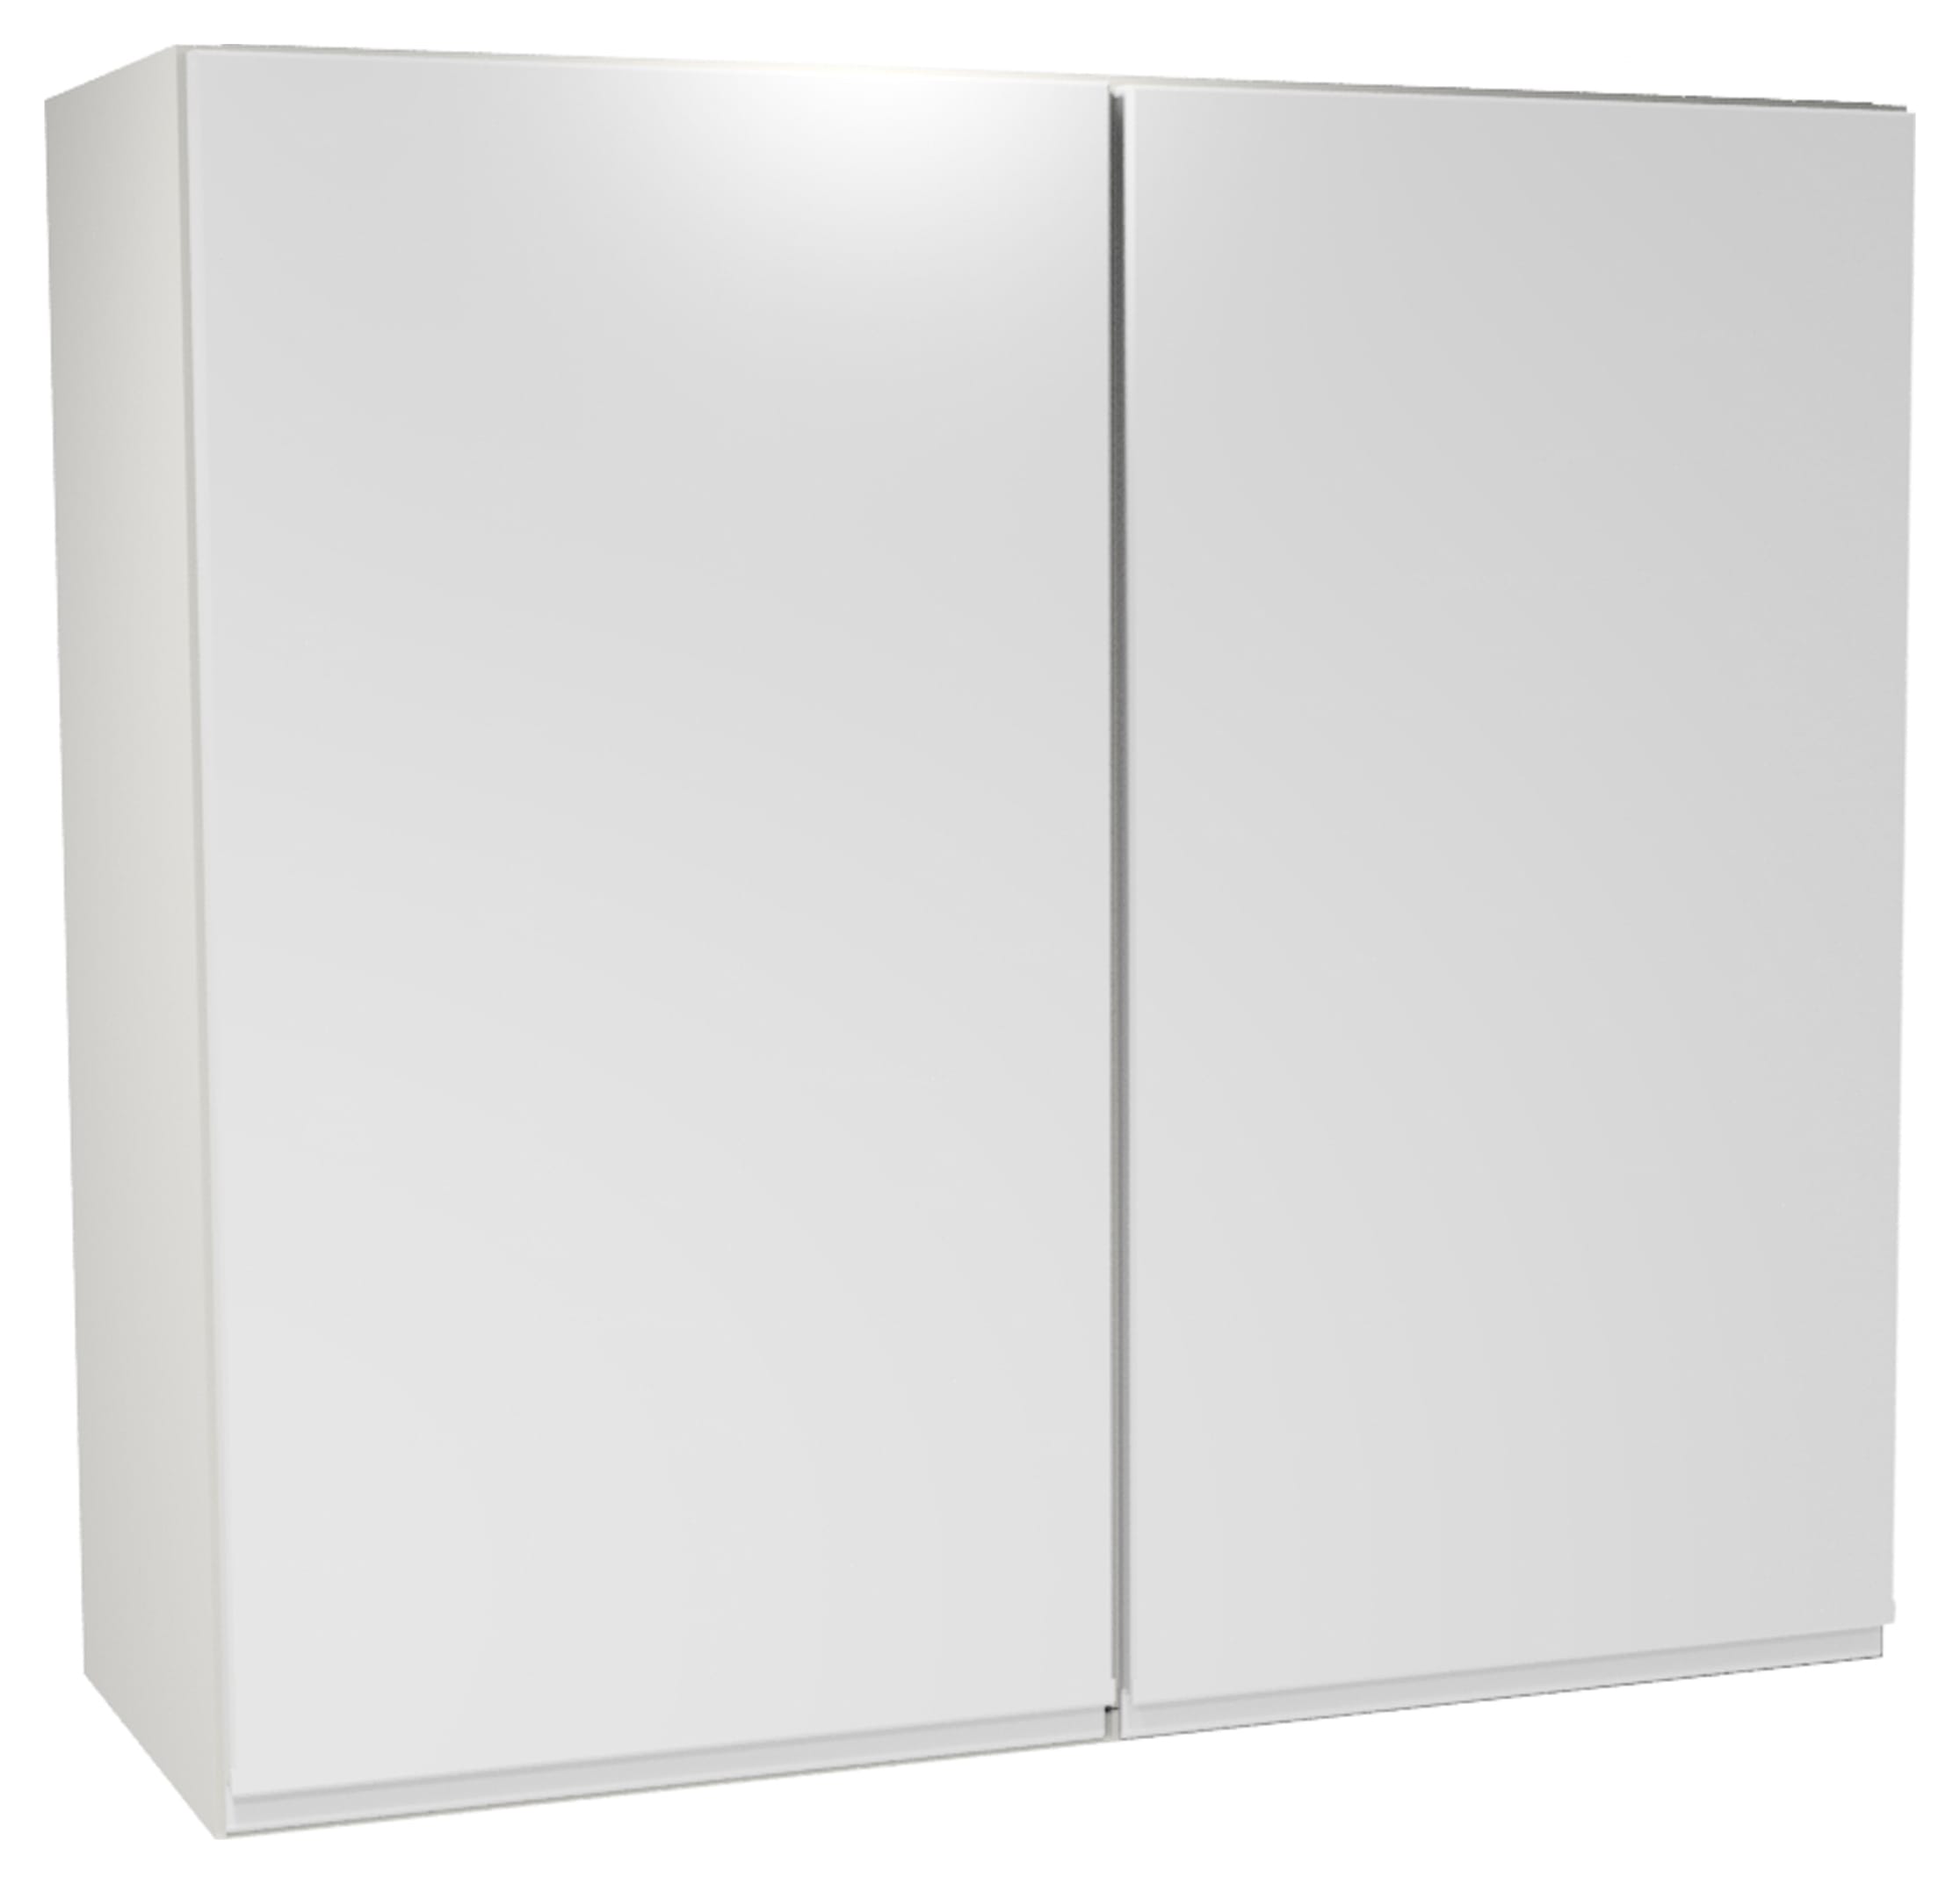 Wickes Madison White Wall Unit - 800mm